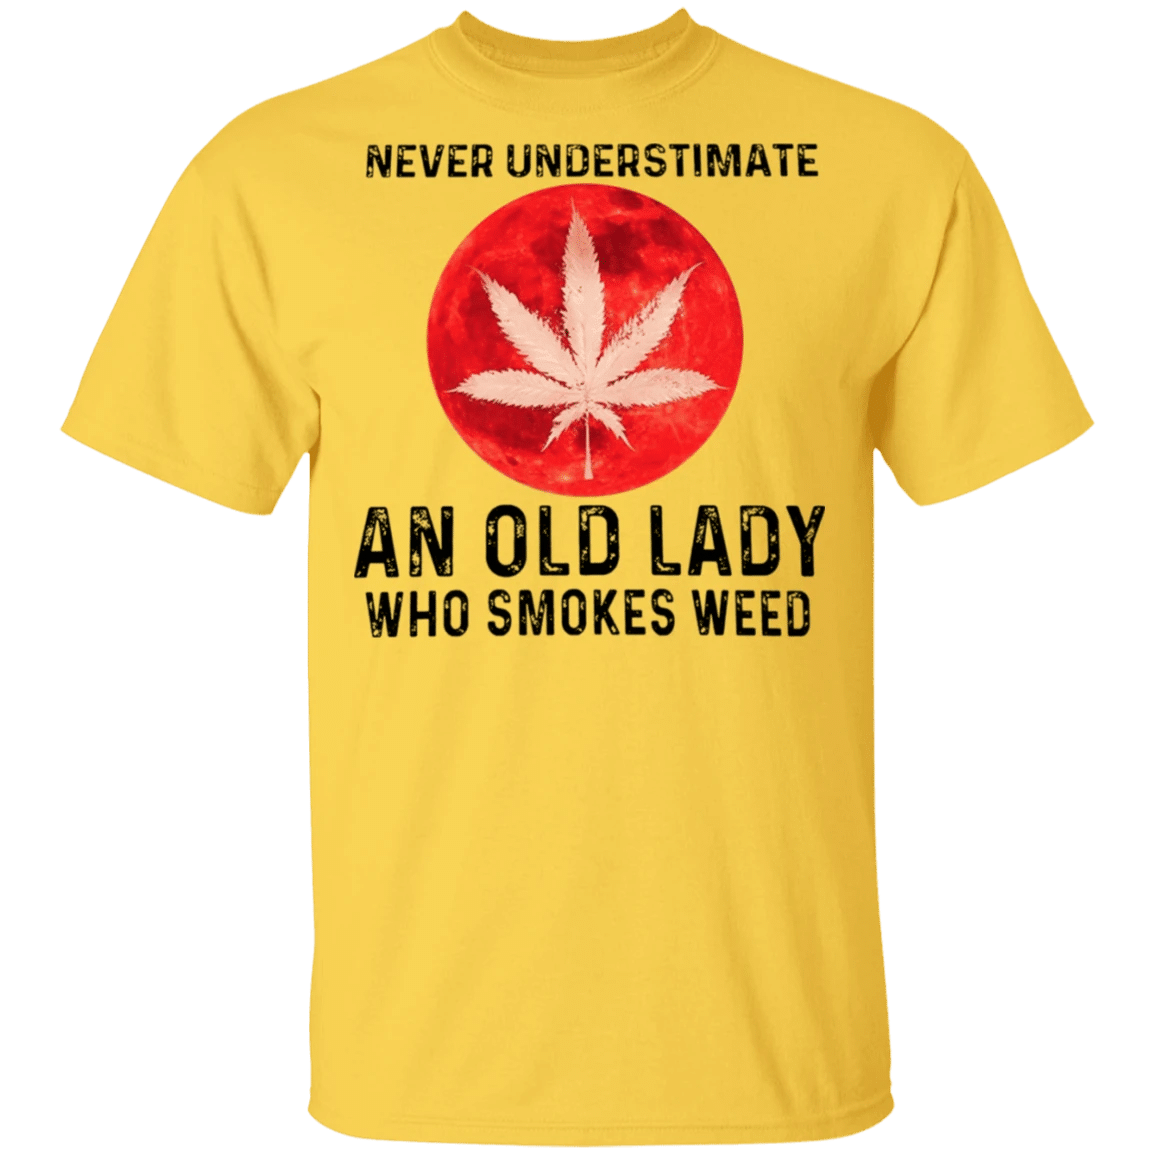 Never Underestimate An Old Lady Who Smokes Weed T-Shirt Cannabis Cool Marijuana Shirts